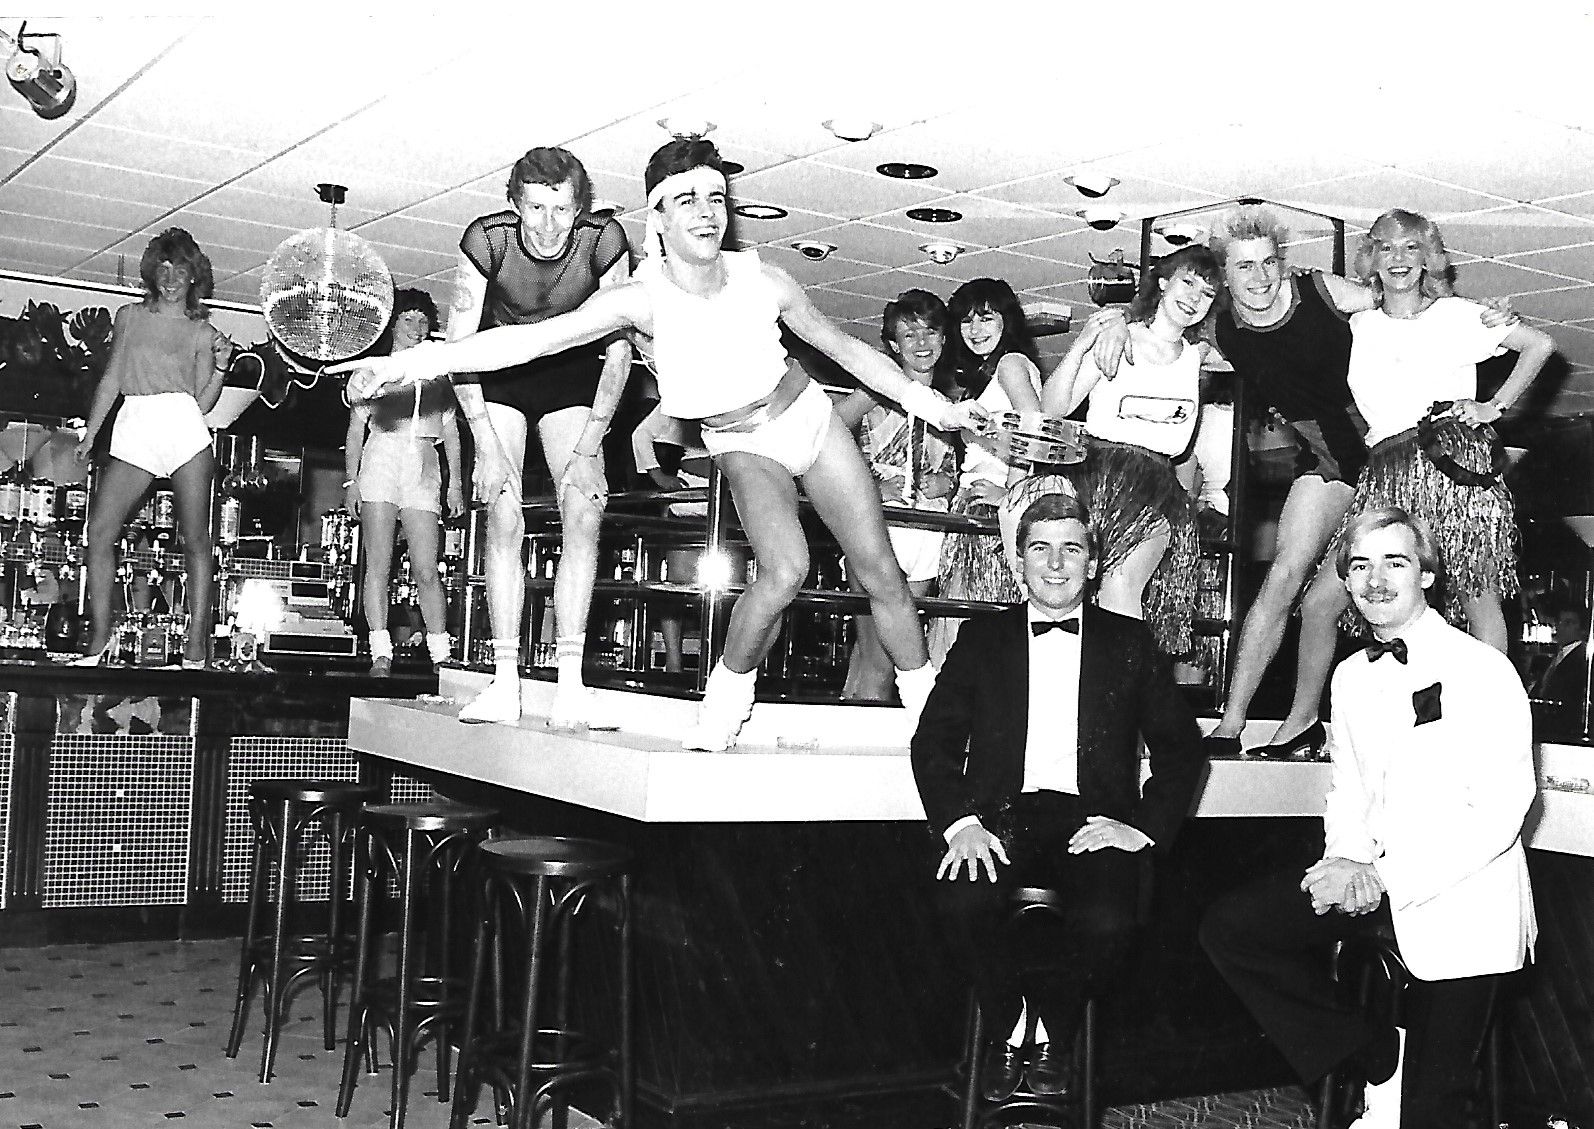 Lots of fancy dress on display at this bar in Southport in May 1984